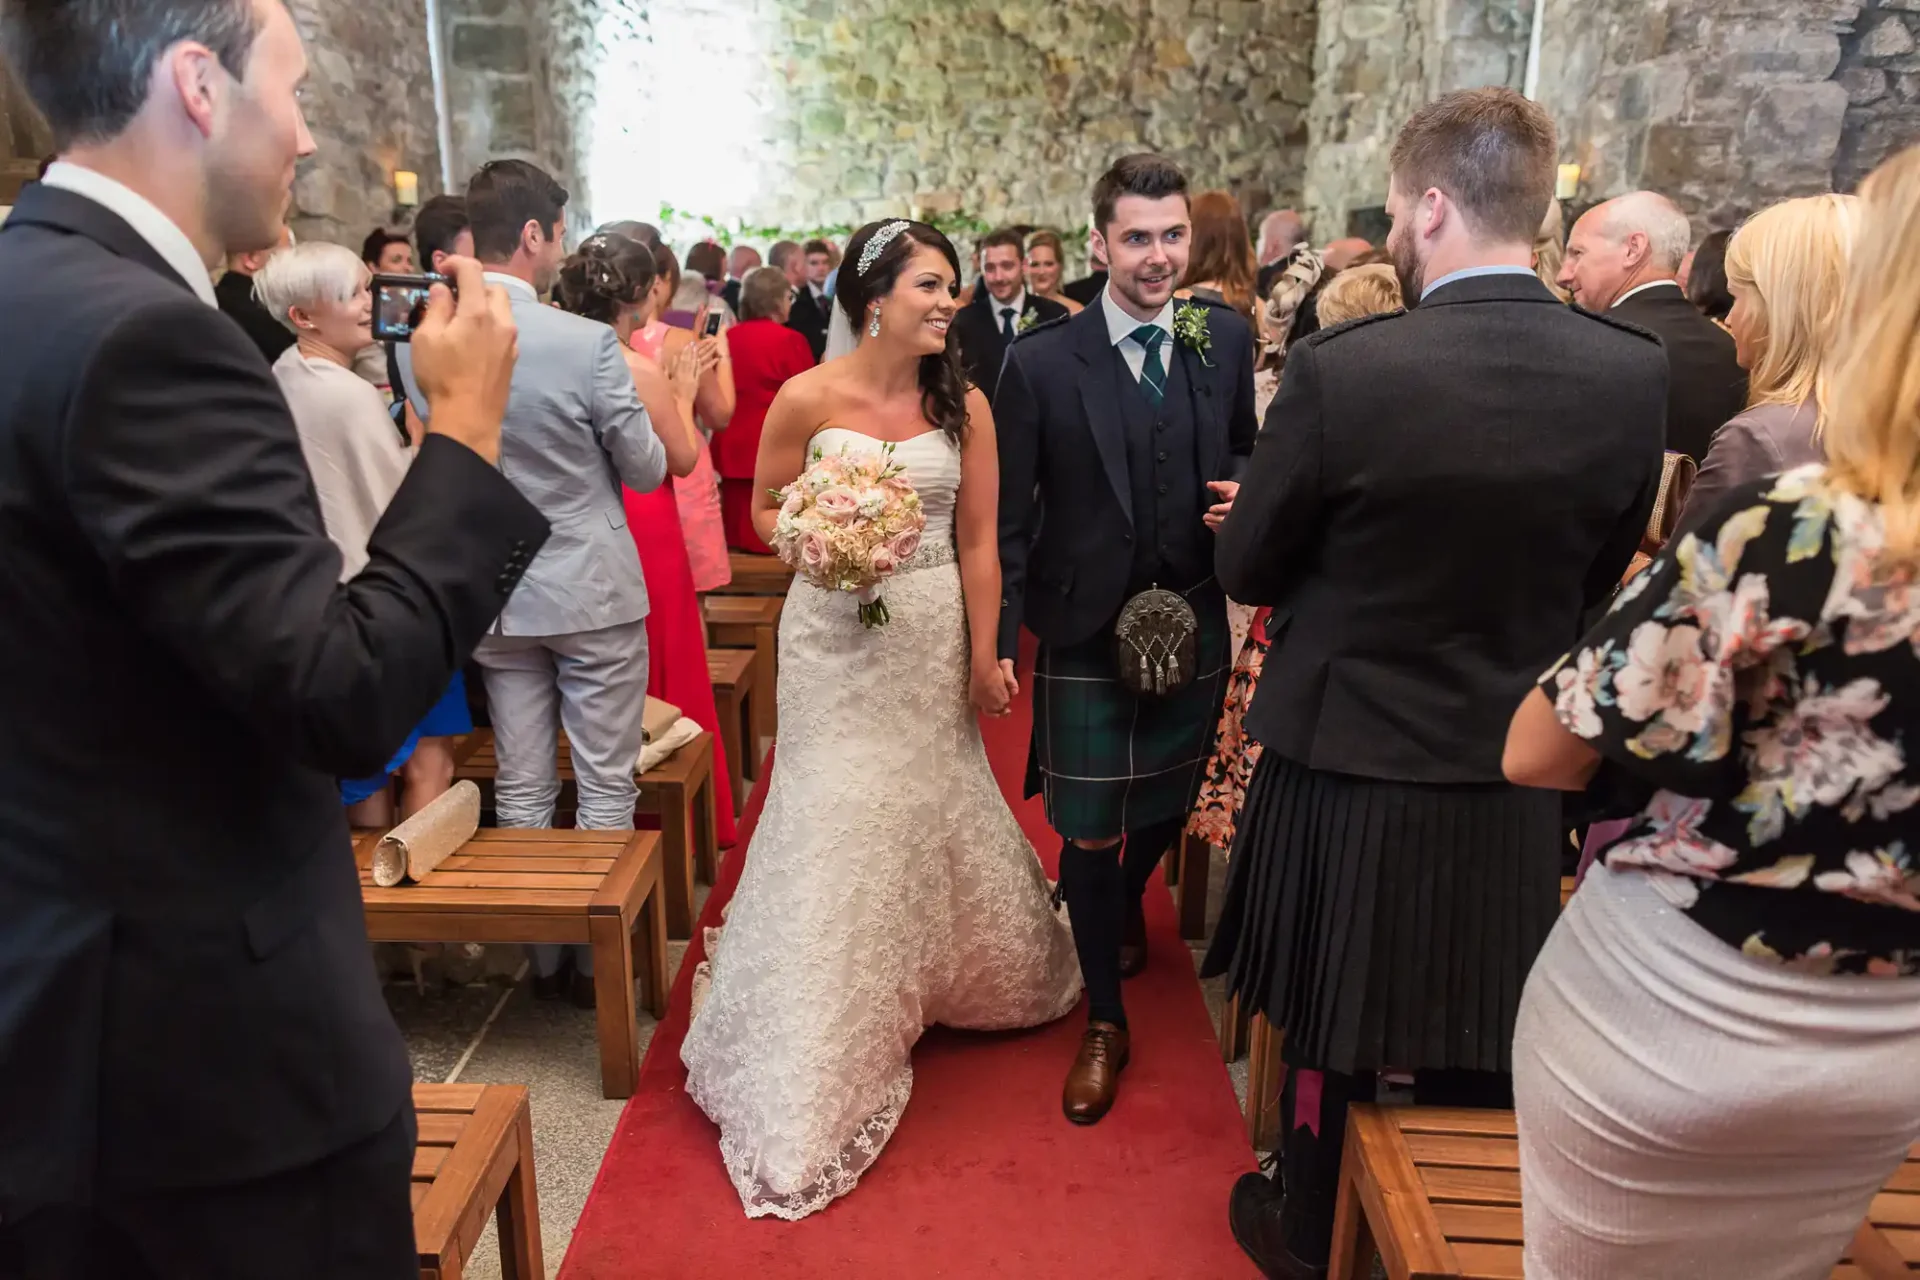 A bride and groom smiling and walking down the aisle, surrounded by guests, inside a stone-walled church. the groom wears a kilt.